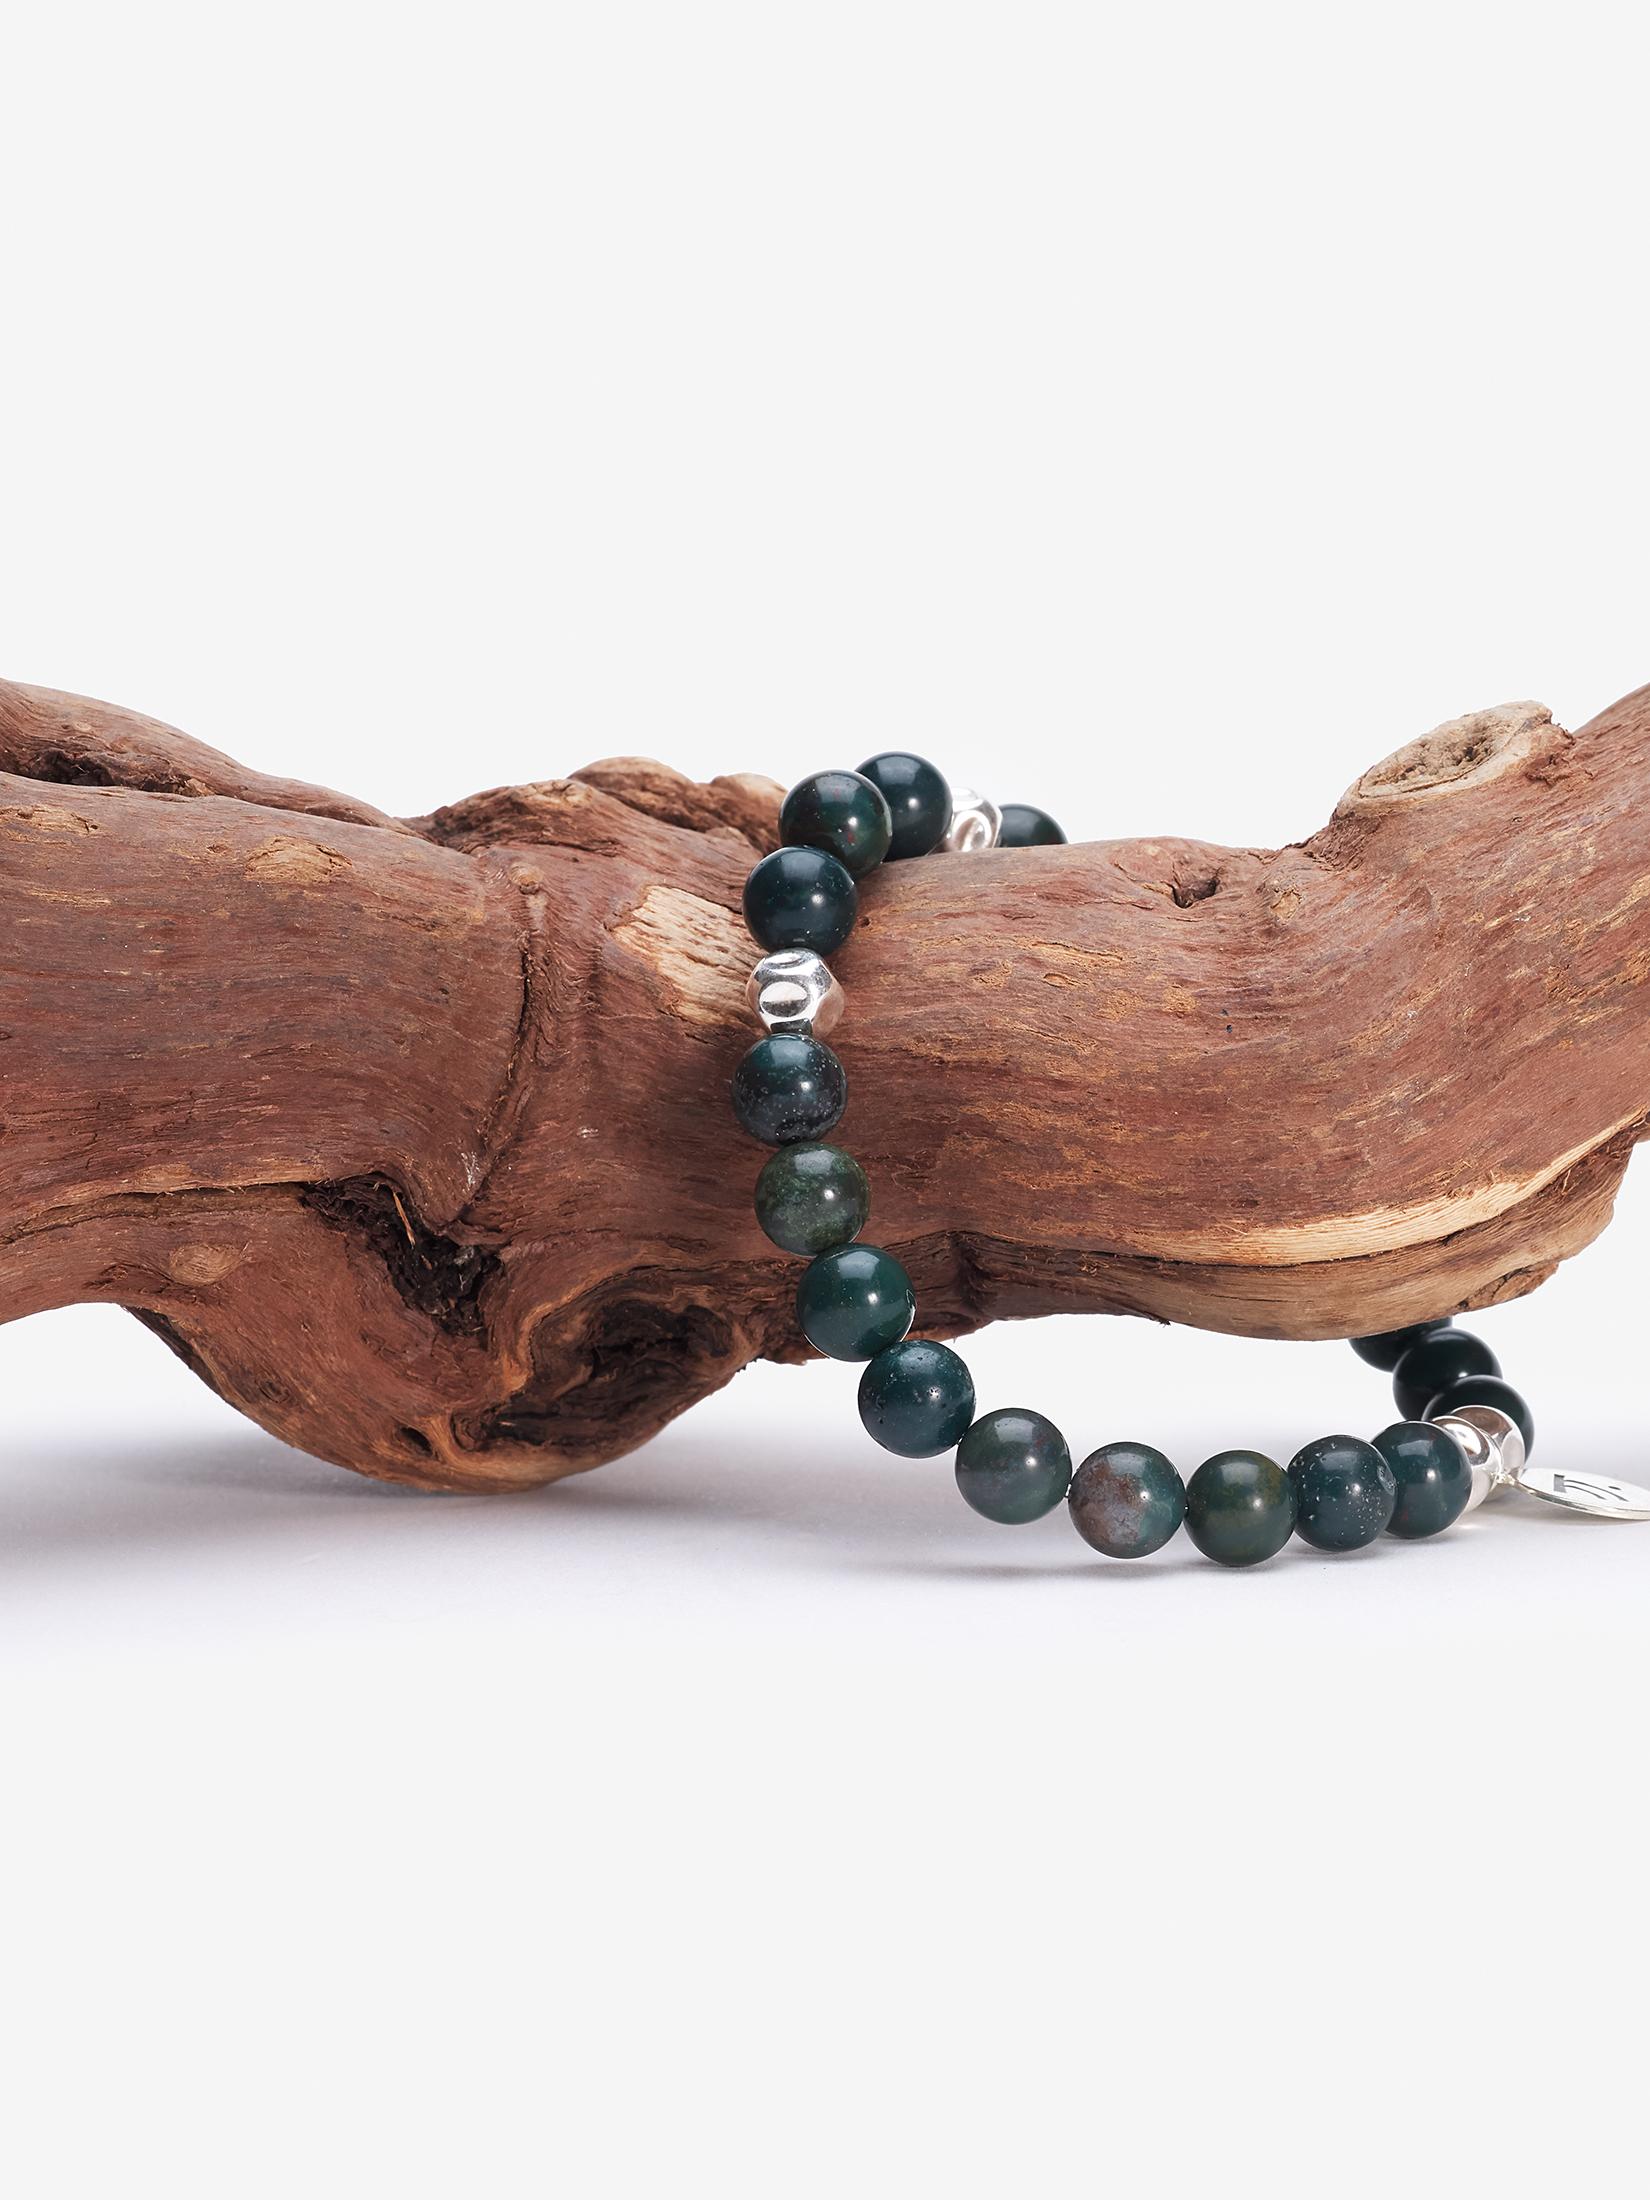 green and black beads meaning